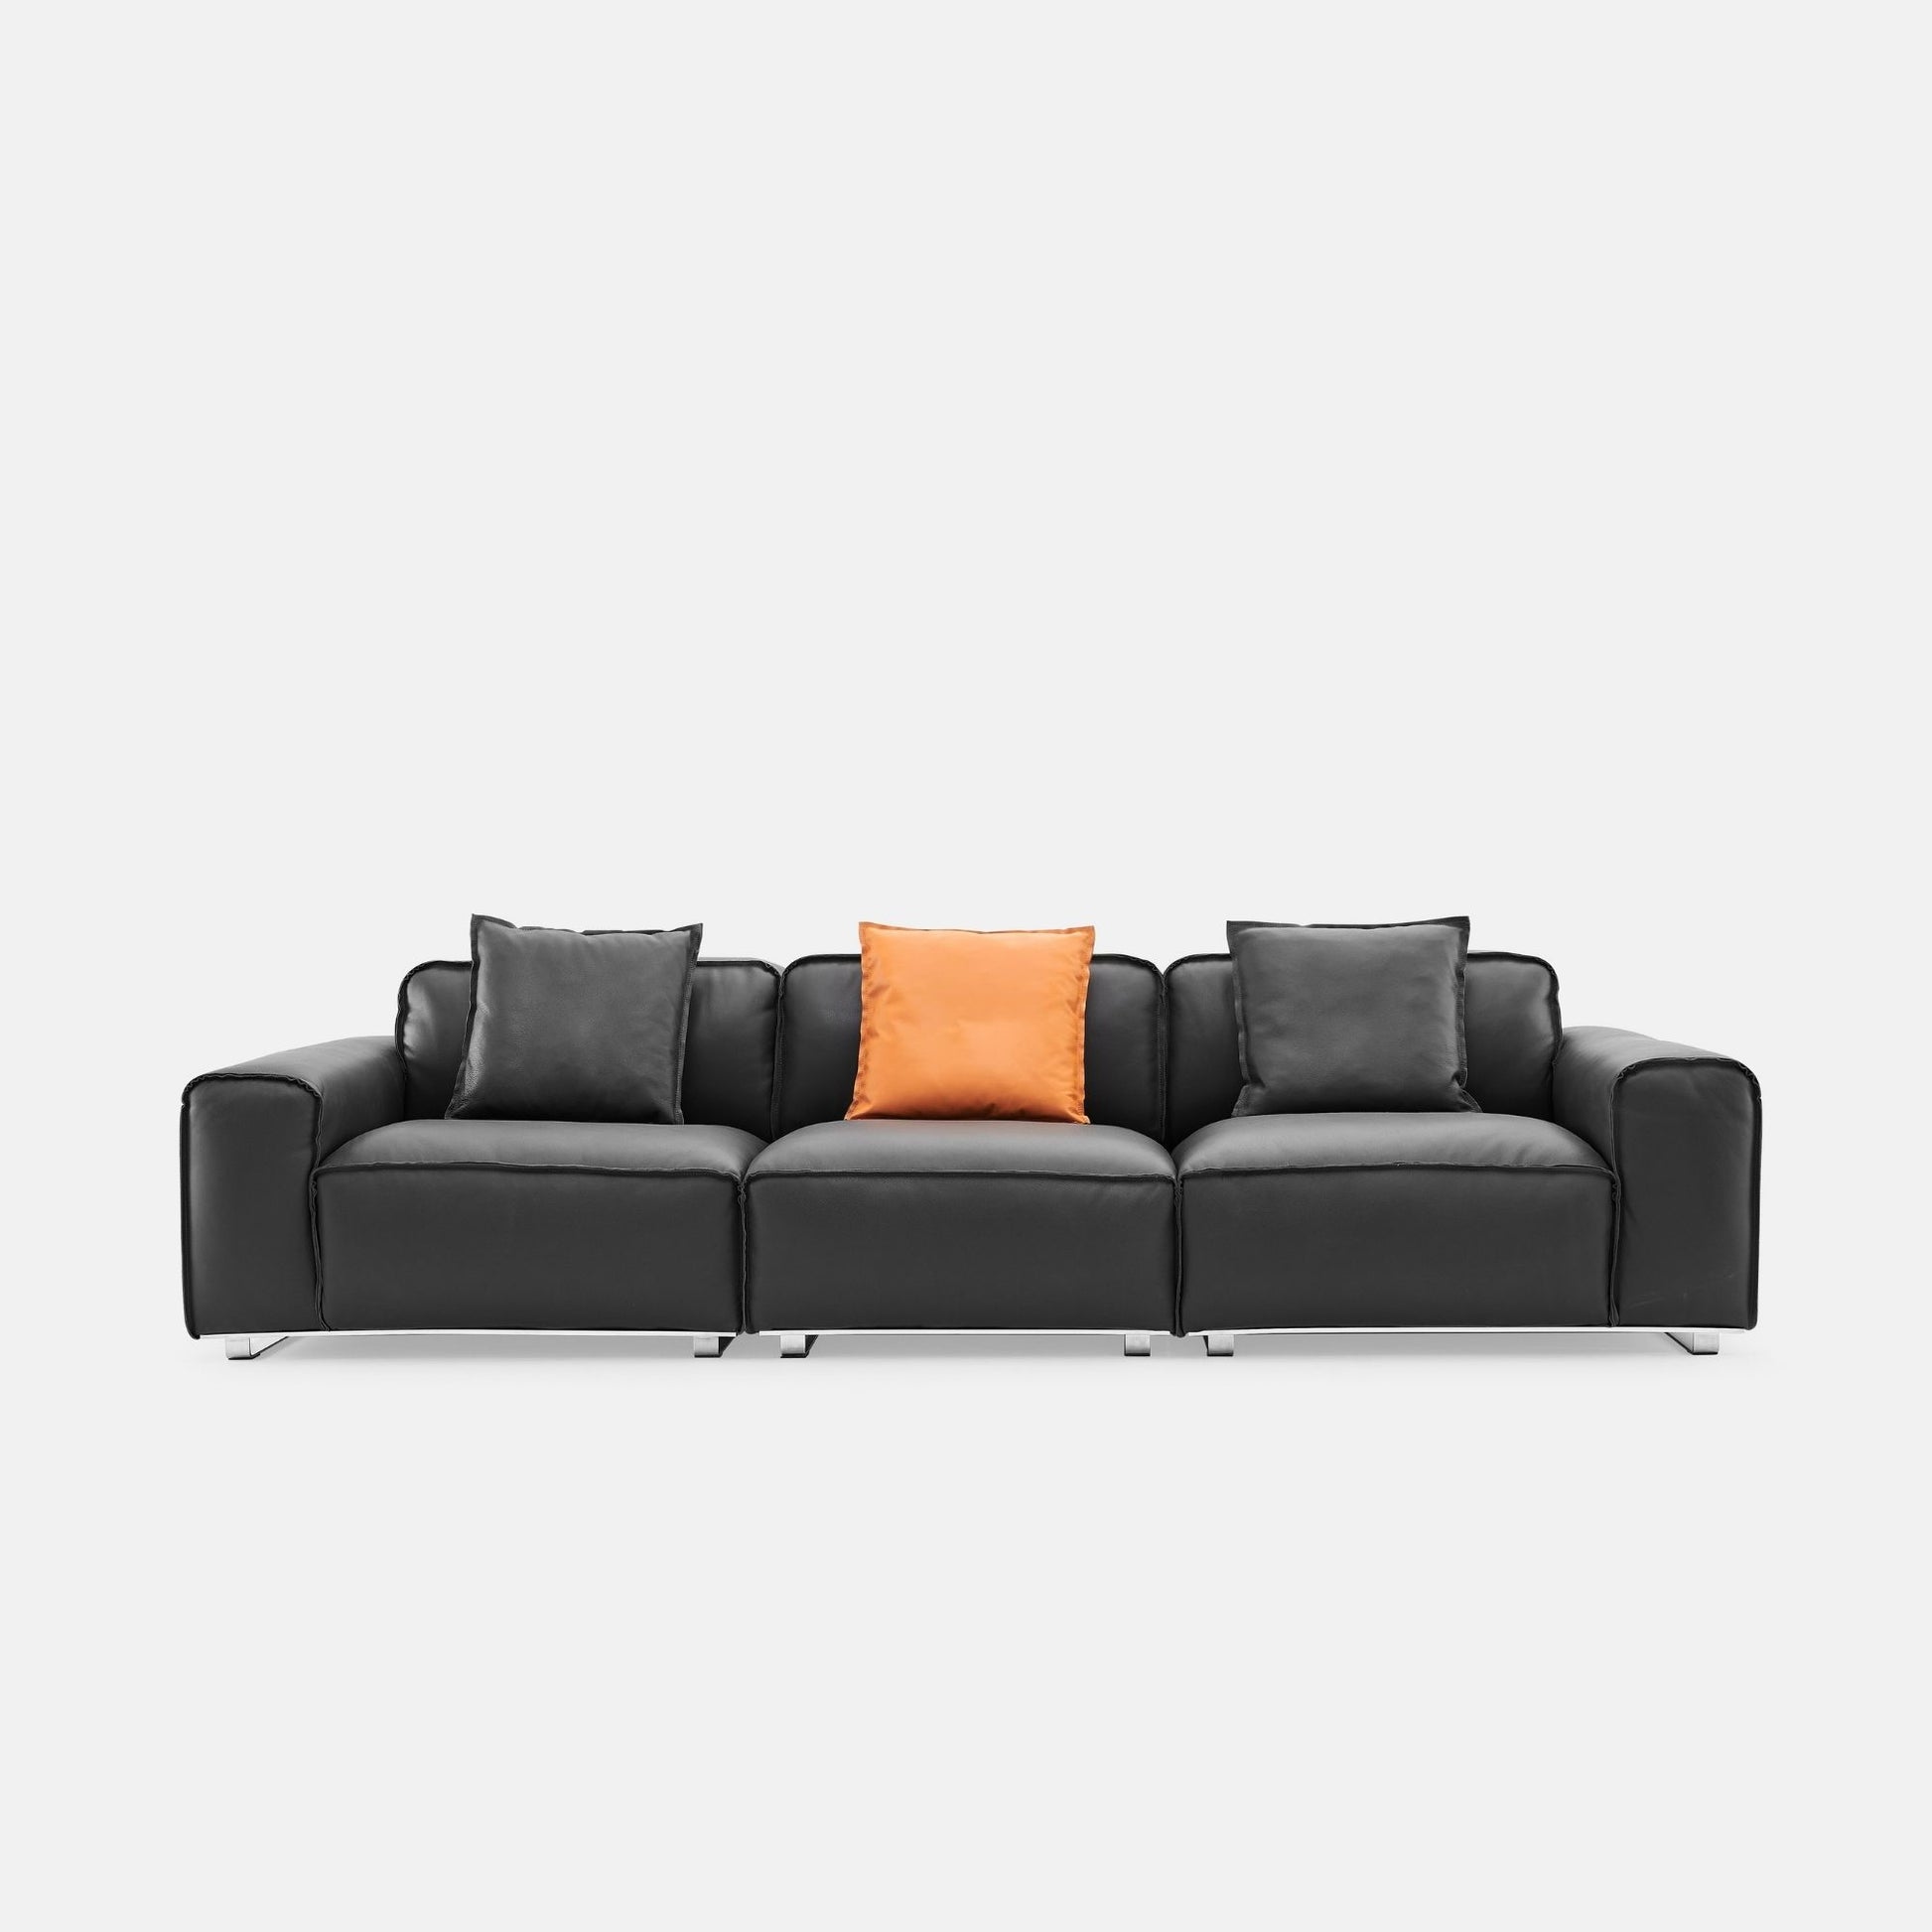 Colby black top grain full leather 3 seat sofa